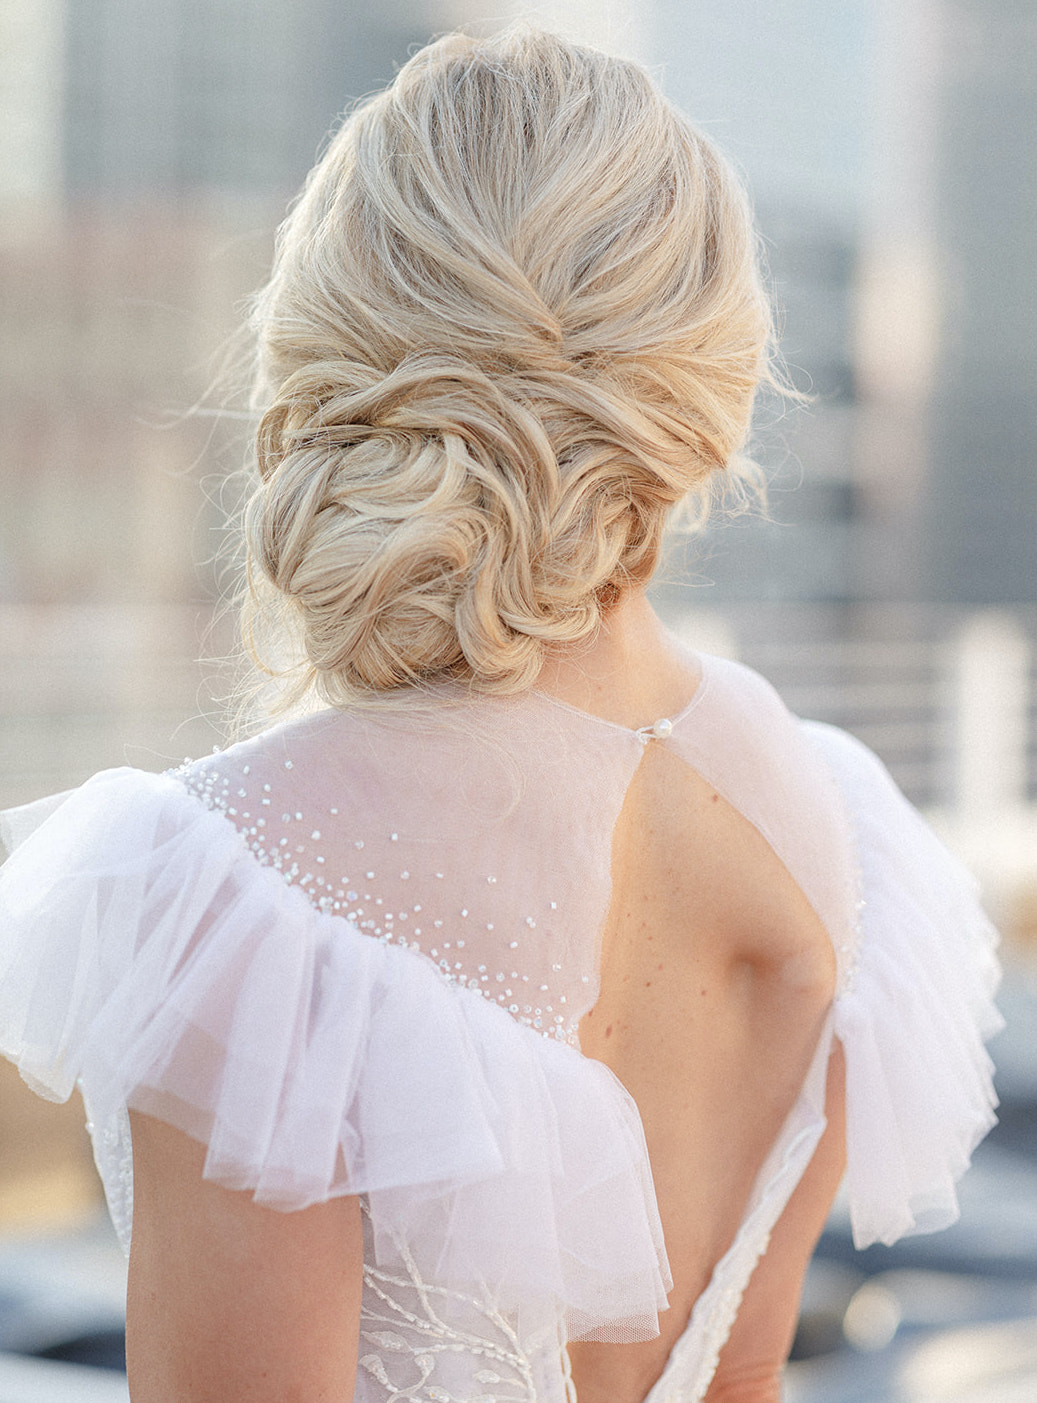 The bride's hair is in a low loose bun that is positioned to the side of her shoulder.